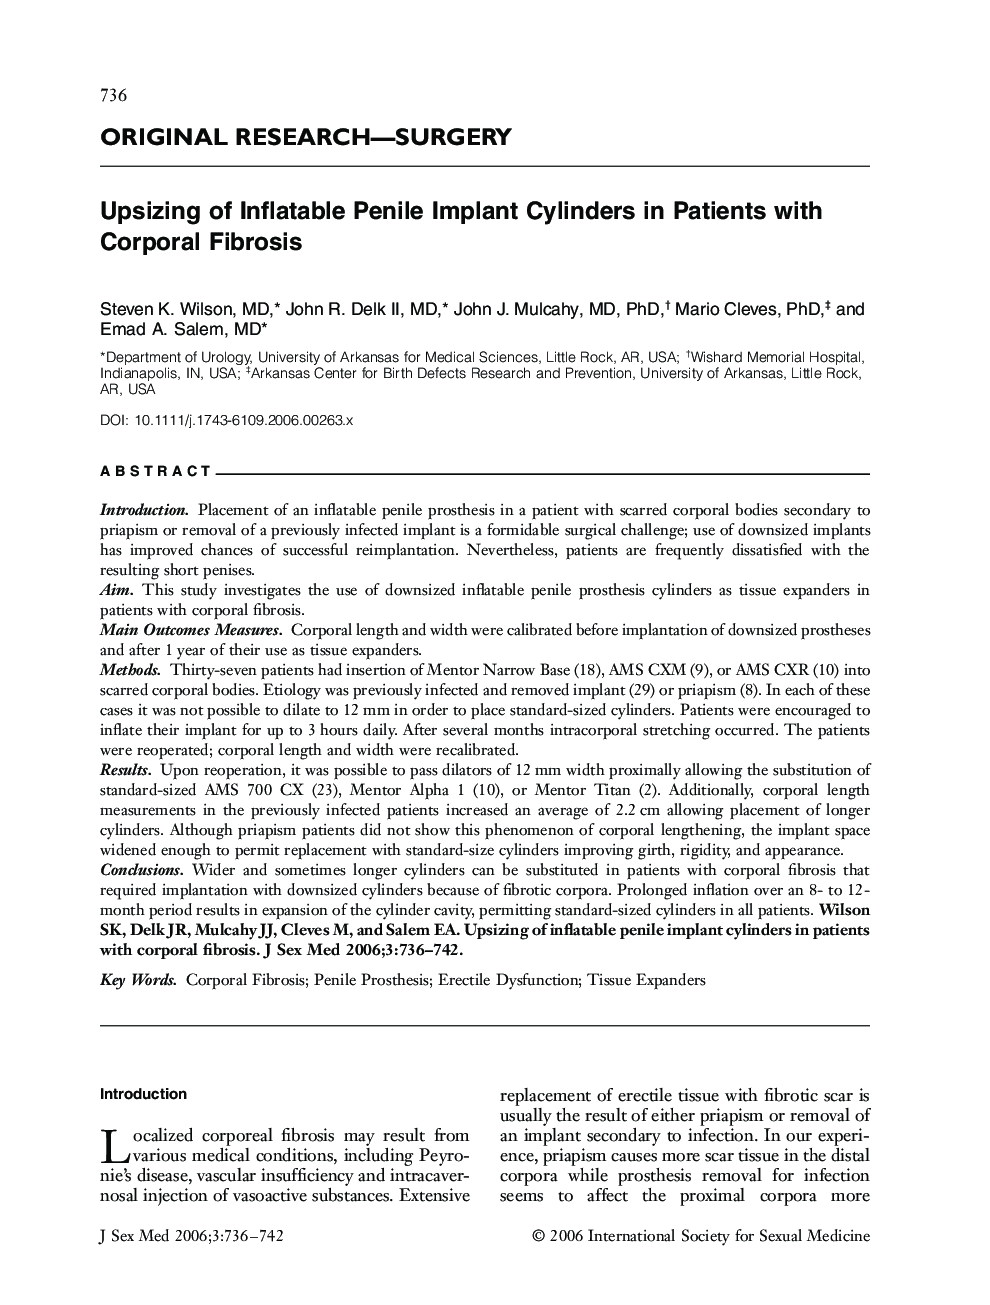 ORIGINAL RESEARCH-SURGERY: Upsizing of Inflatable Penile Implant Cylinders in Patients with Corporal Fibrosis